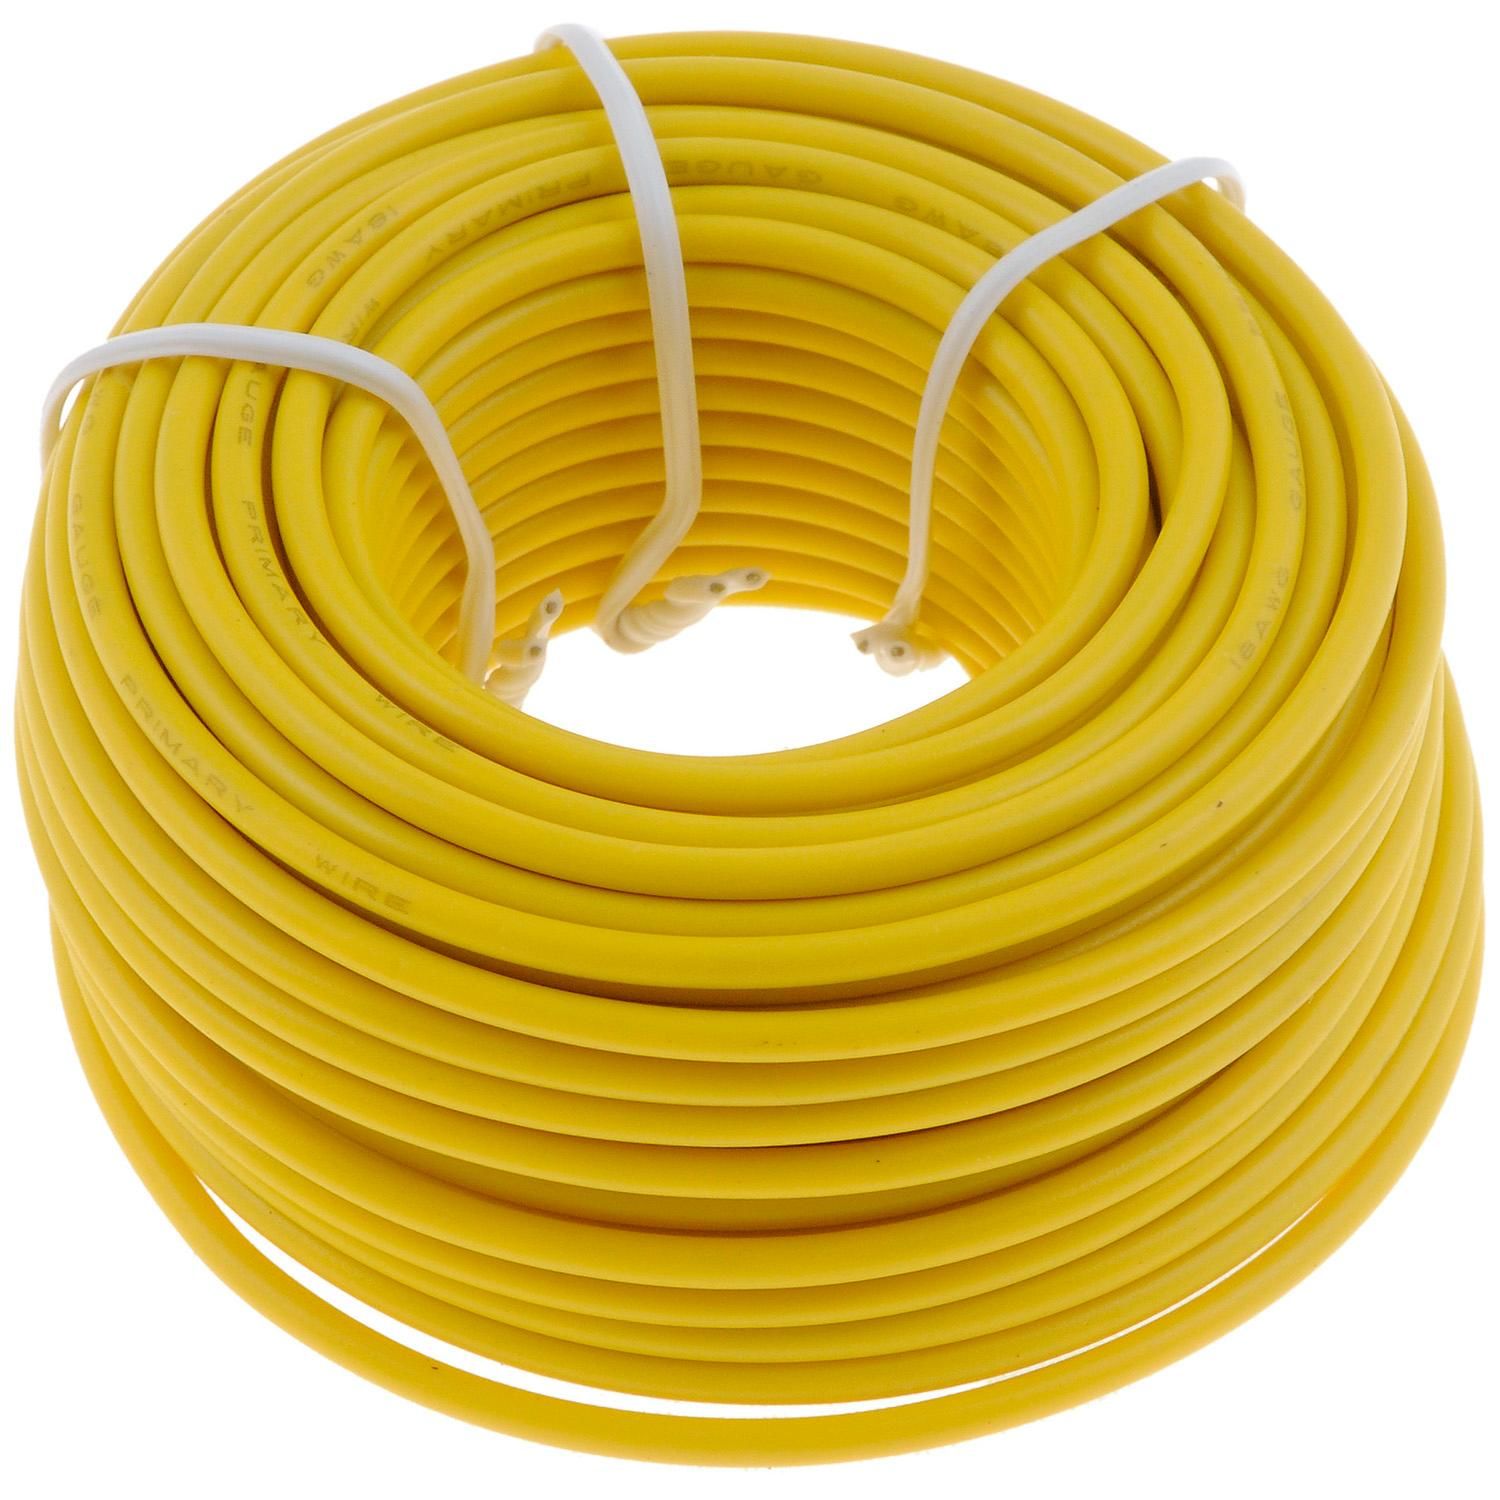 Dorman - Conduct-Tite Yellow 40ft 18 Gauge Primary Wire